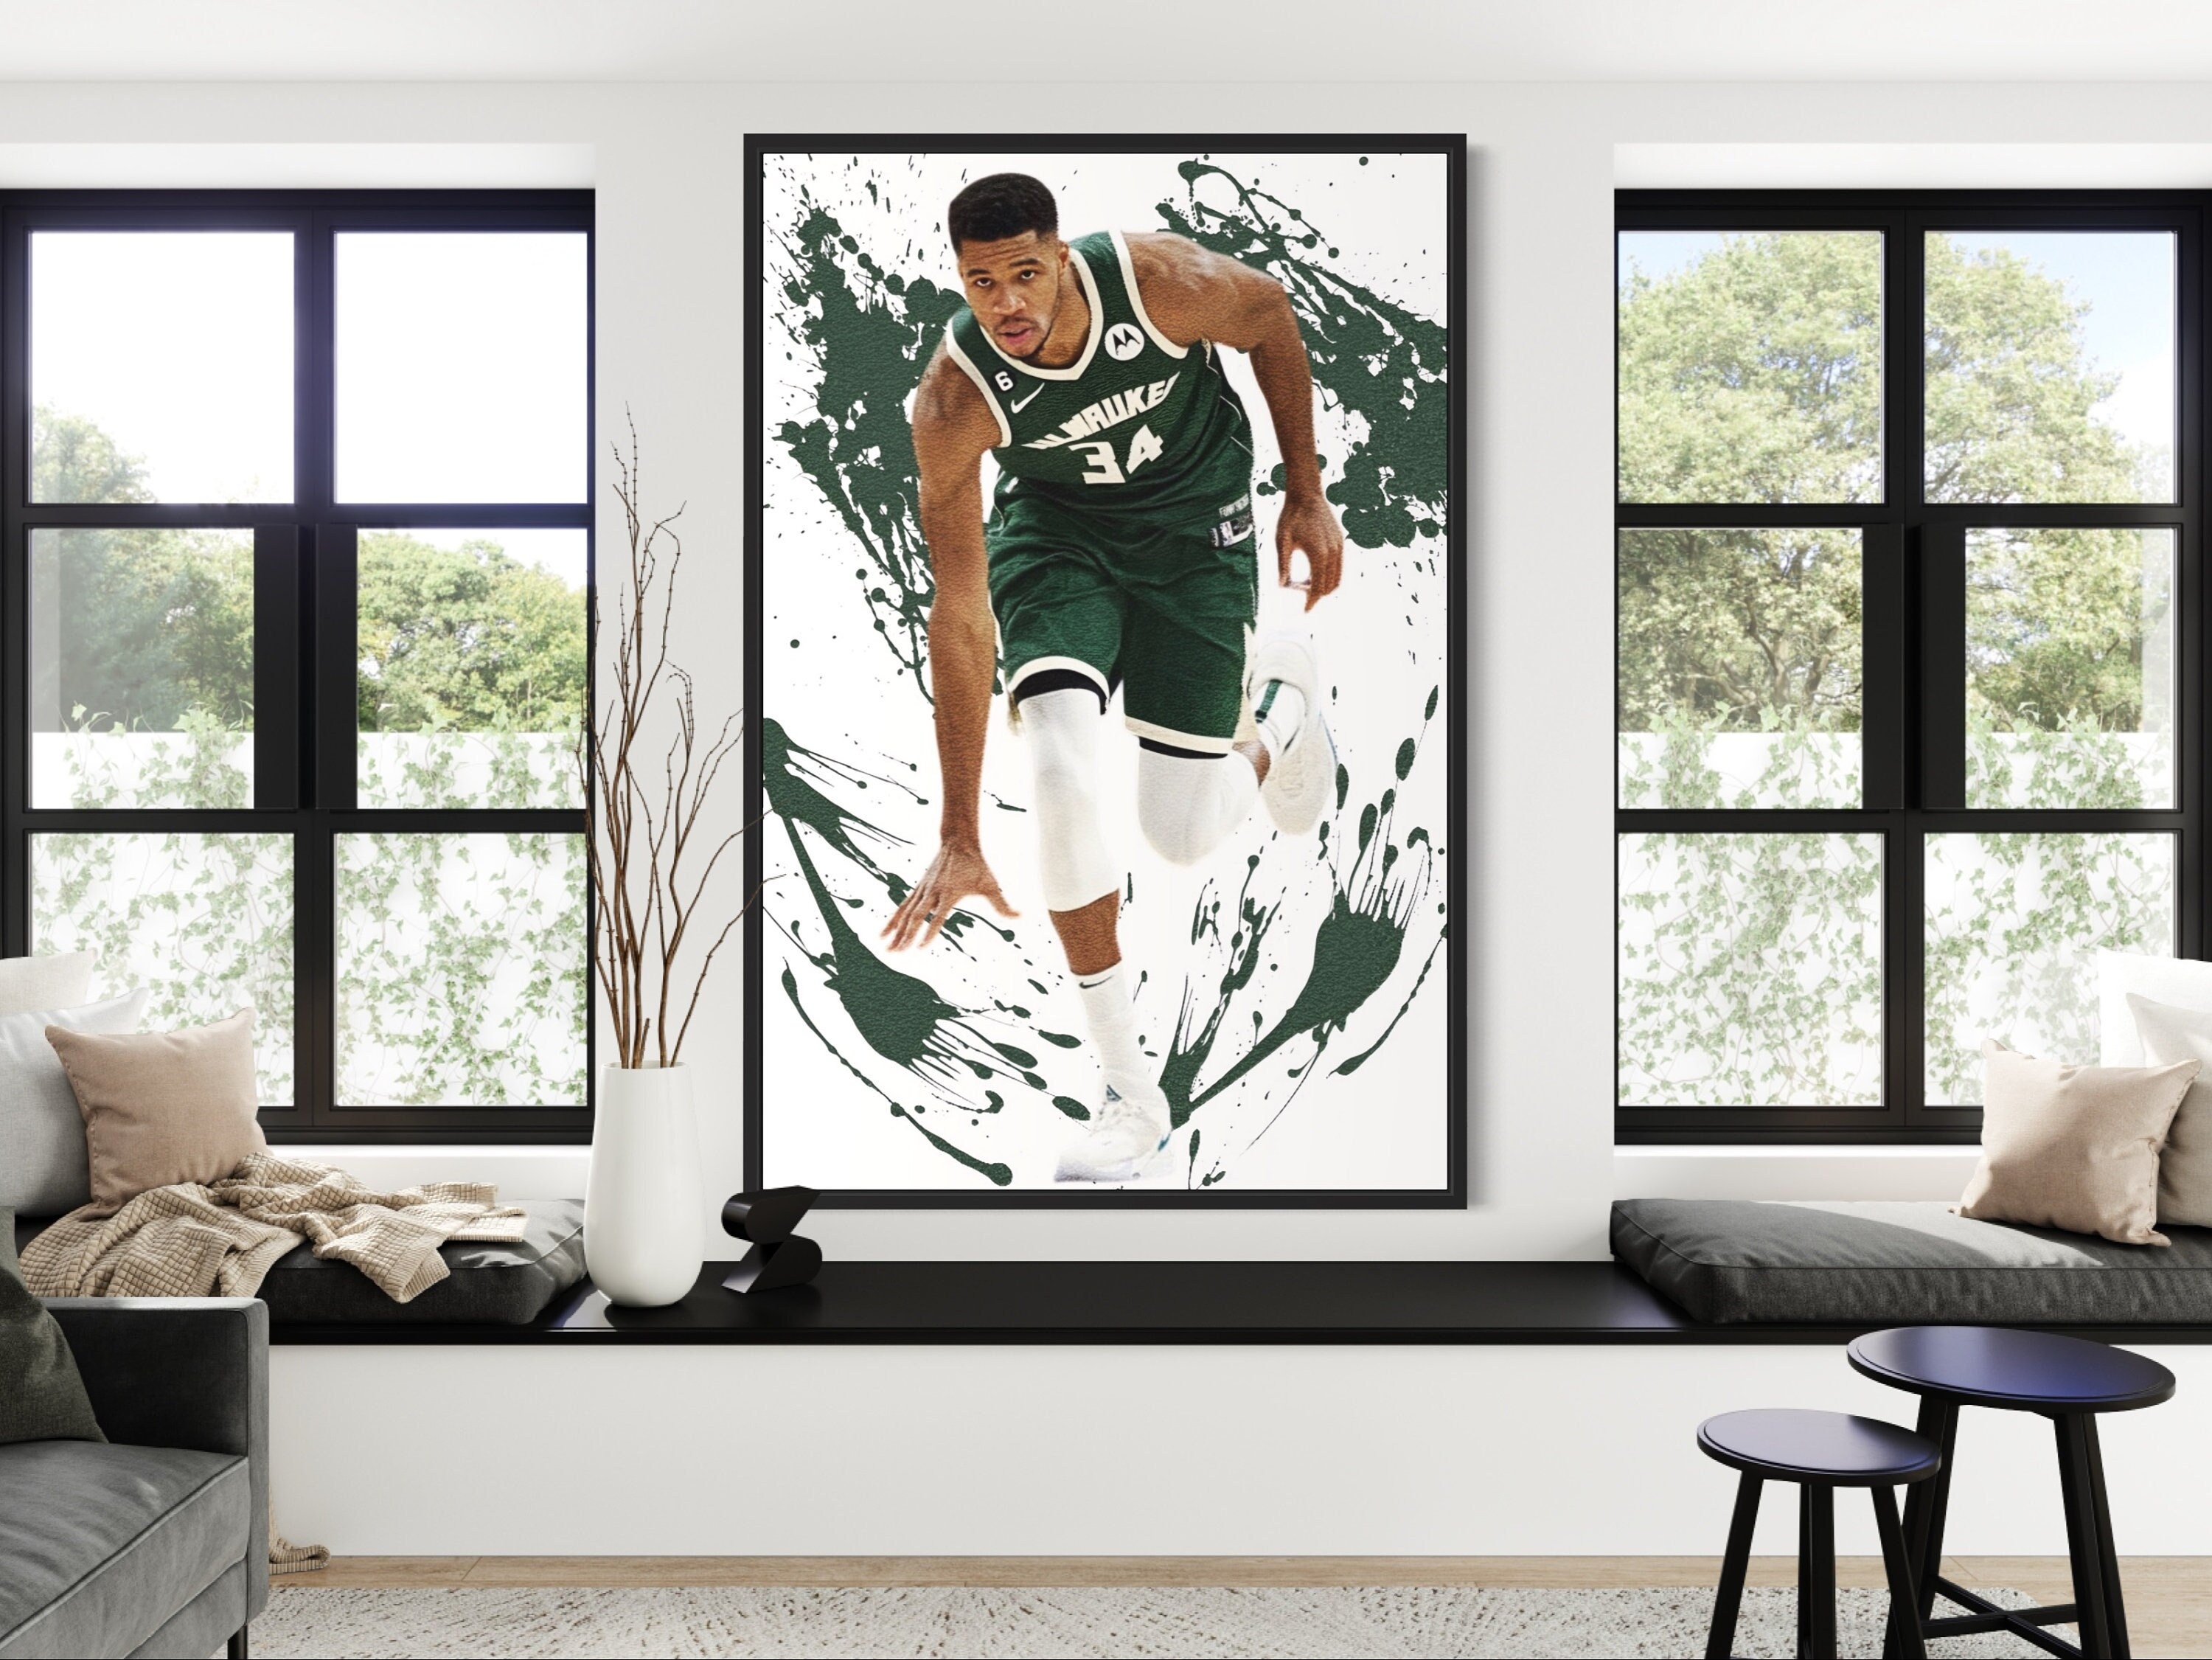 Retro Giannis Wall Mural  Buy online at Europosters